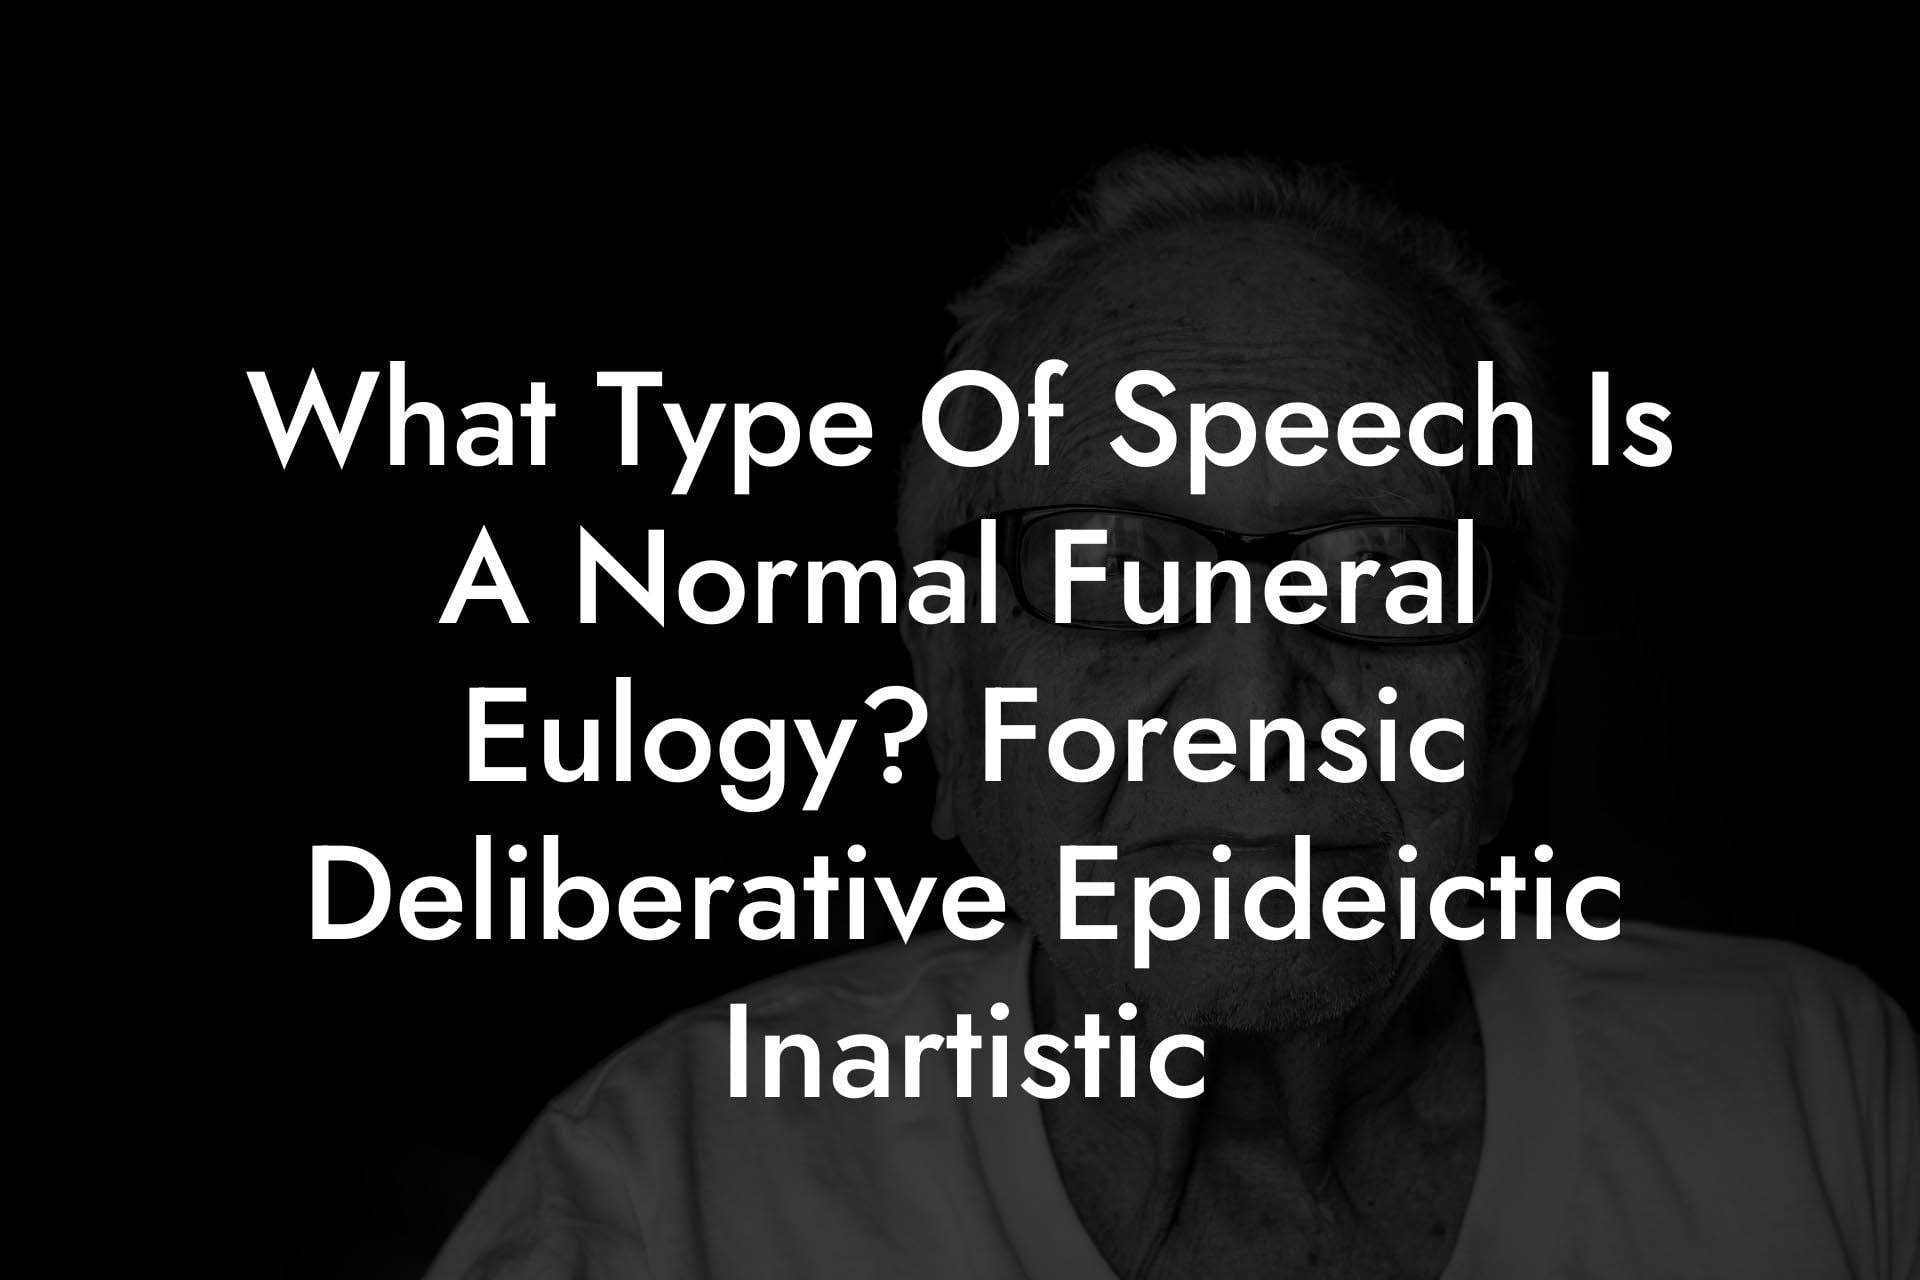 What Type Of Speech Is A Normal Funeral Eulogy? Forensic Deliberative Epideictic Inartistic